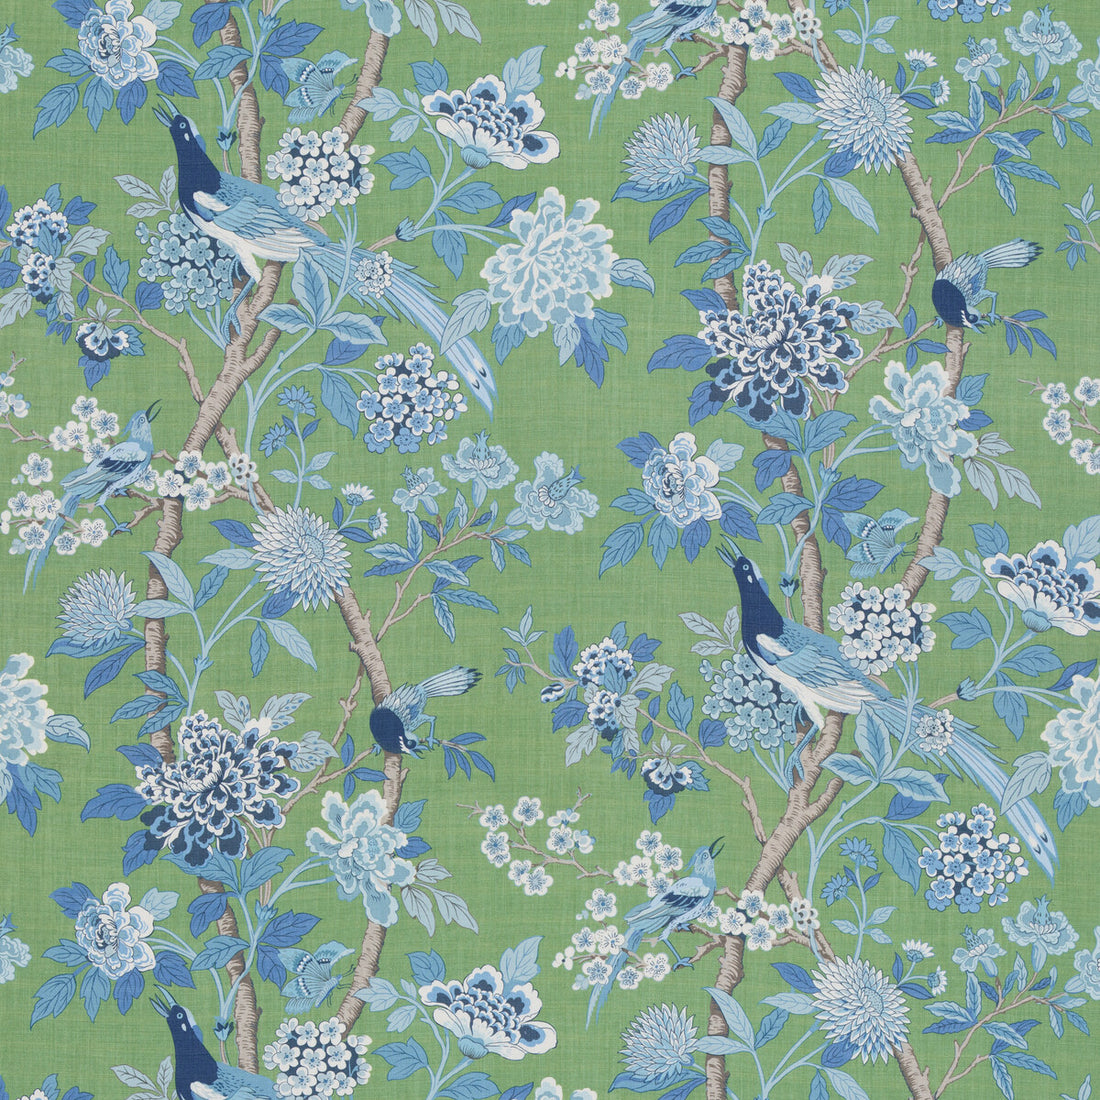 Hydrangea Bird - Archive fabric in emerald/blue color - pattern BP10851.3.0 - by G P &amp; J Baker in the Chifu collection